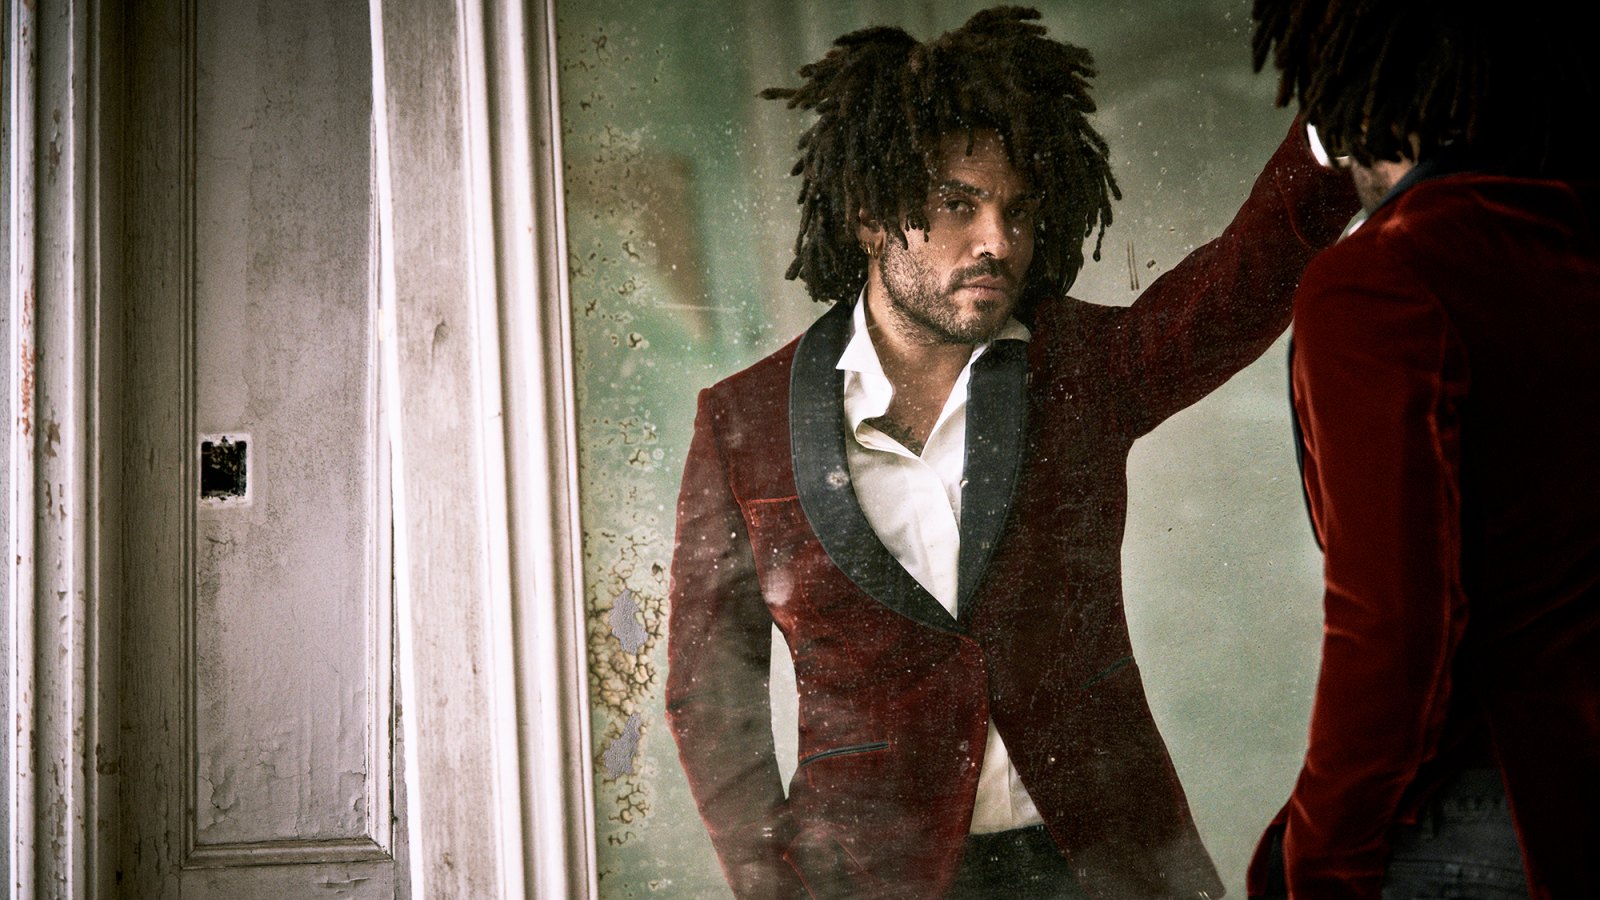 MR PORTER sits down in an exclusive interview with singer-songwriter Mr Lenny Kravitz